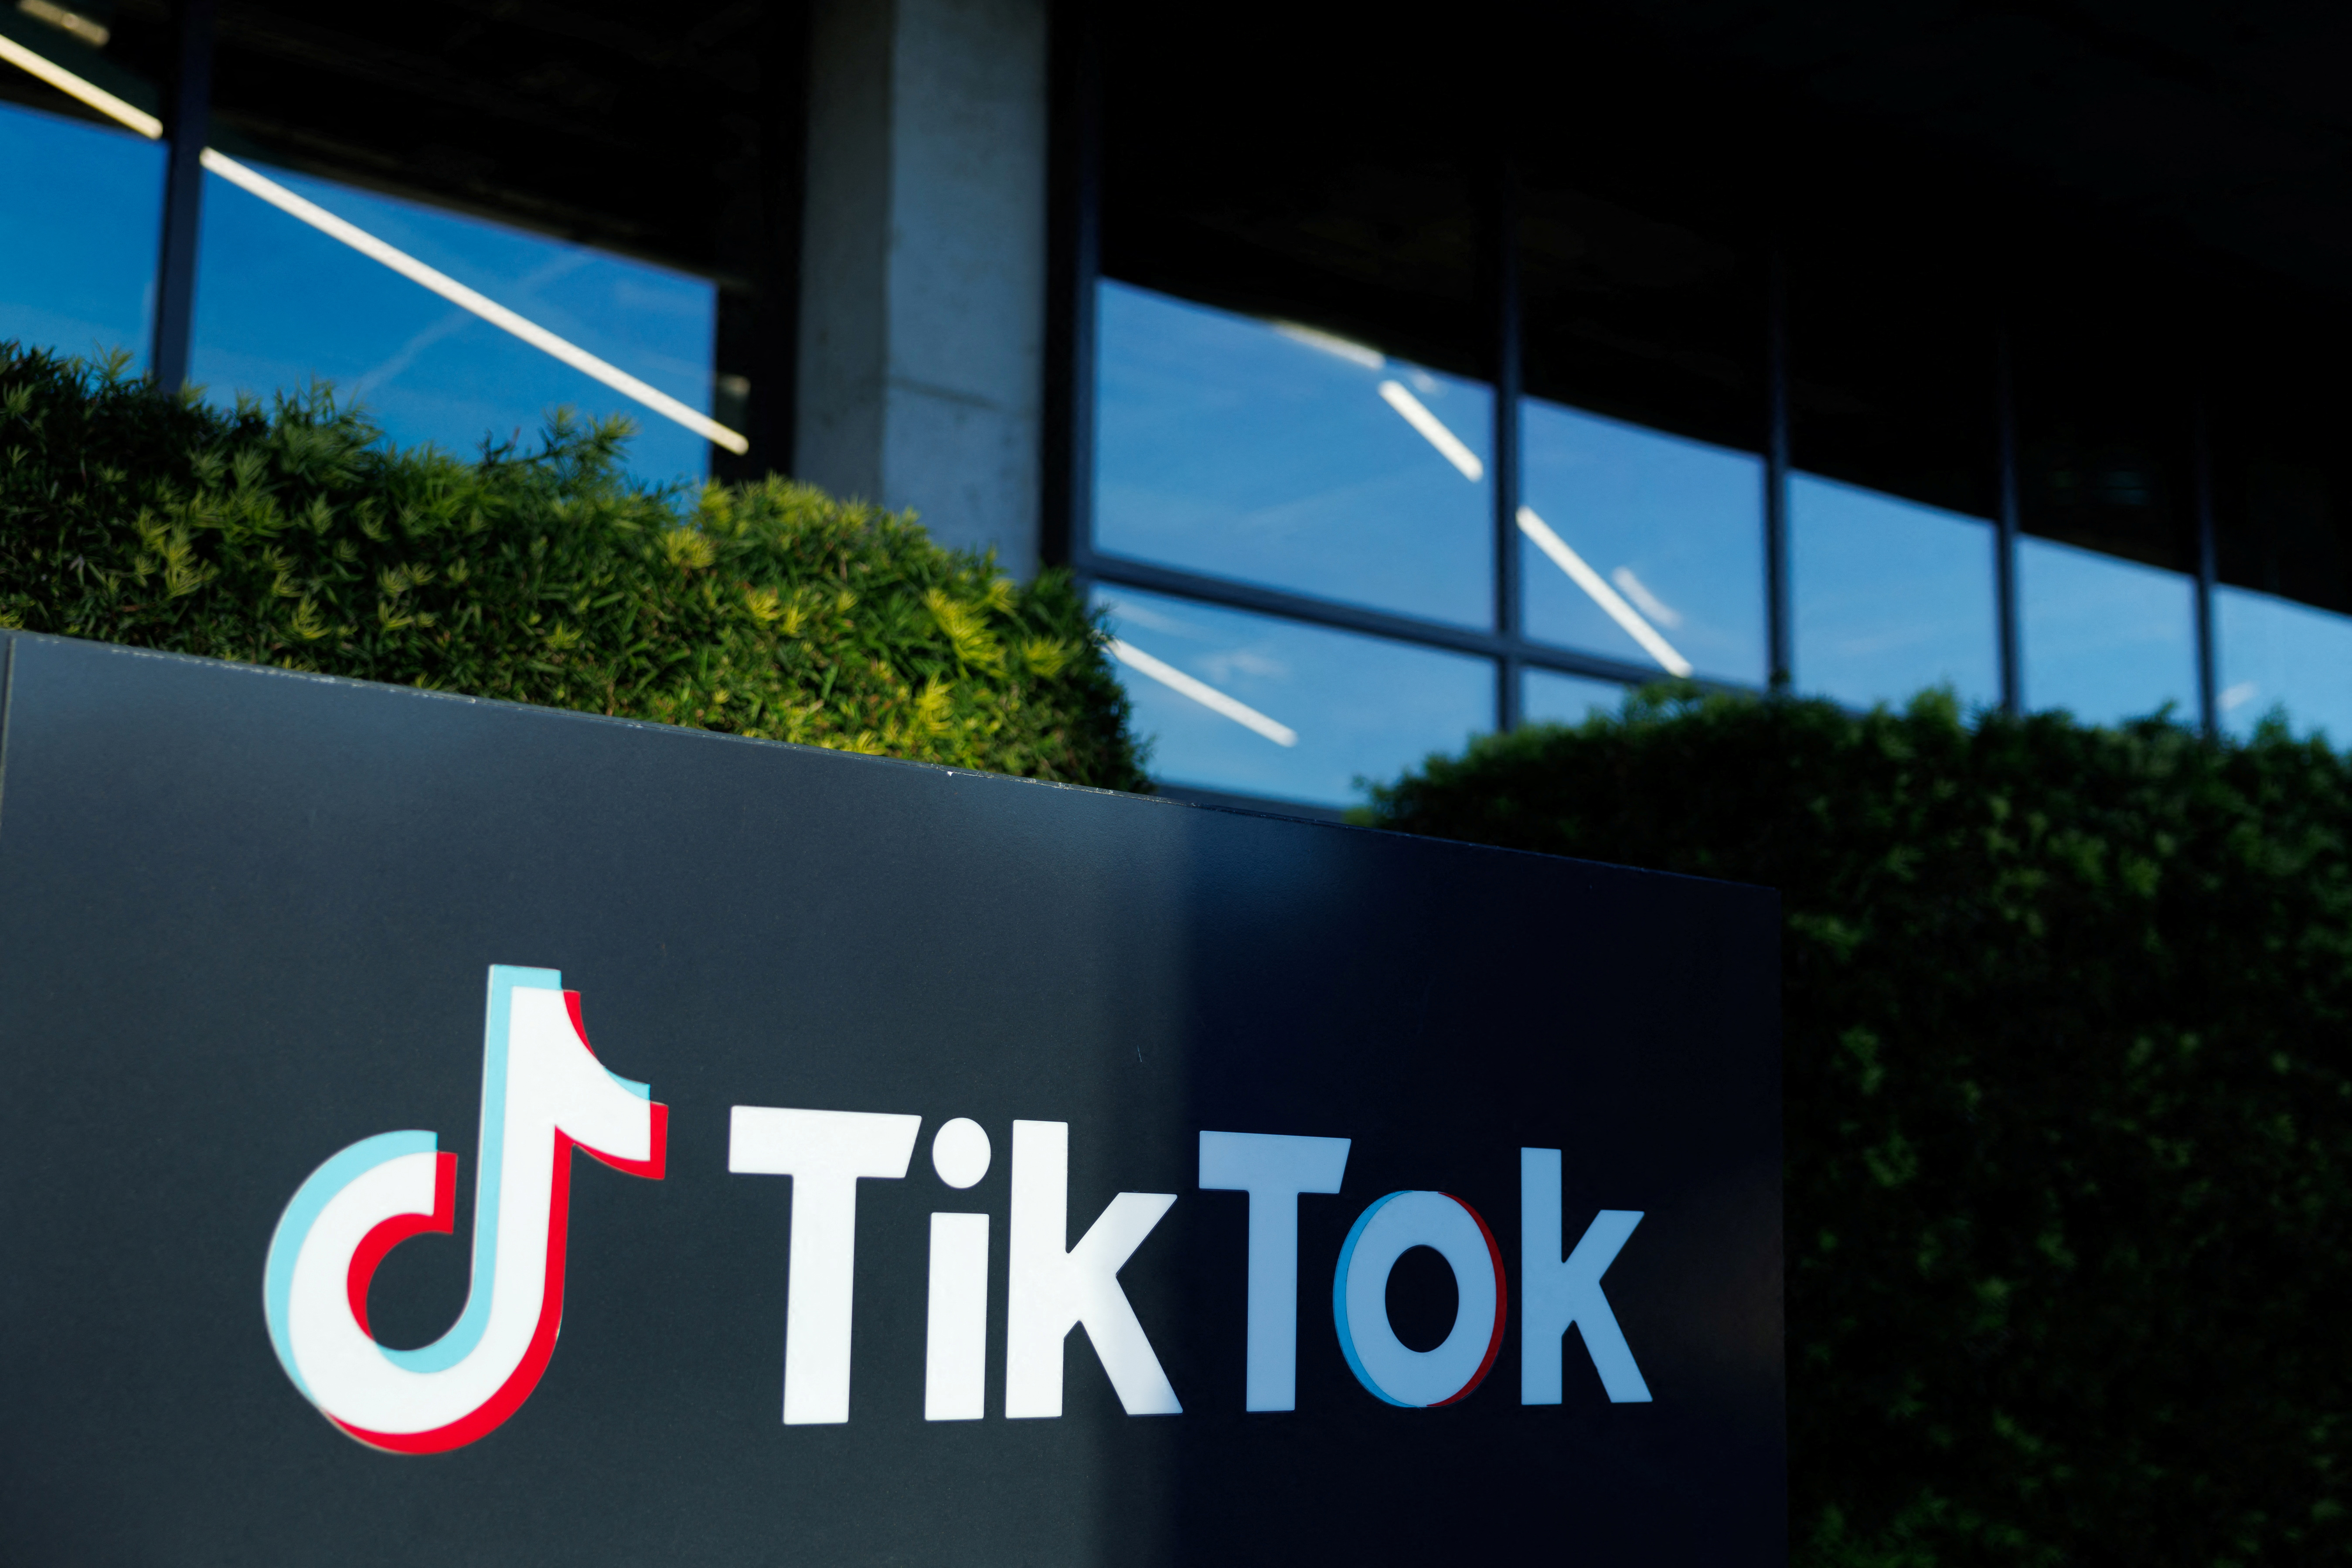 The TikTok office in Culver City, California, is pictured on March 13.